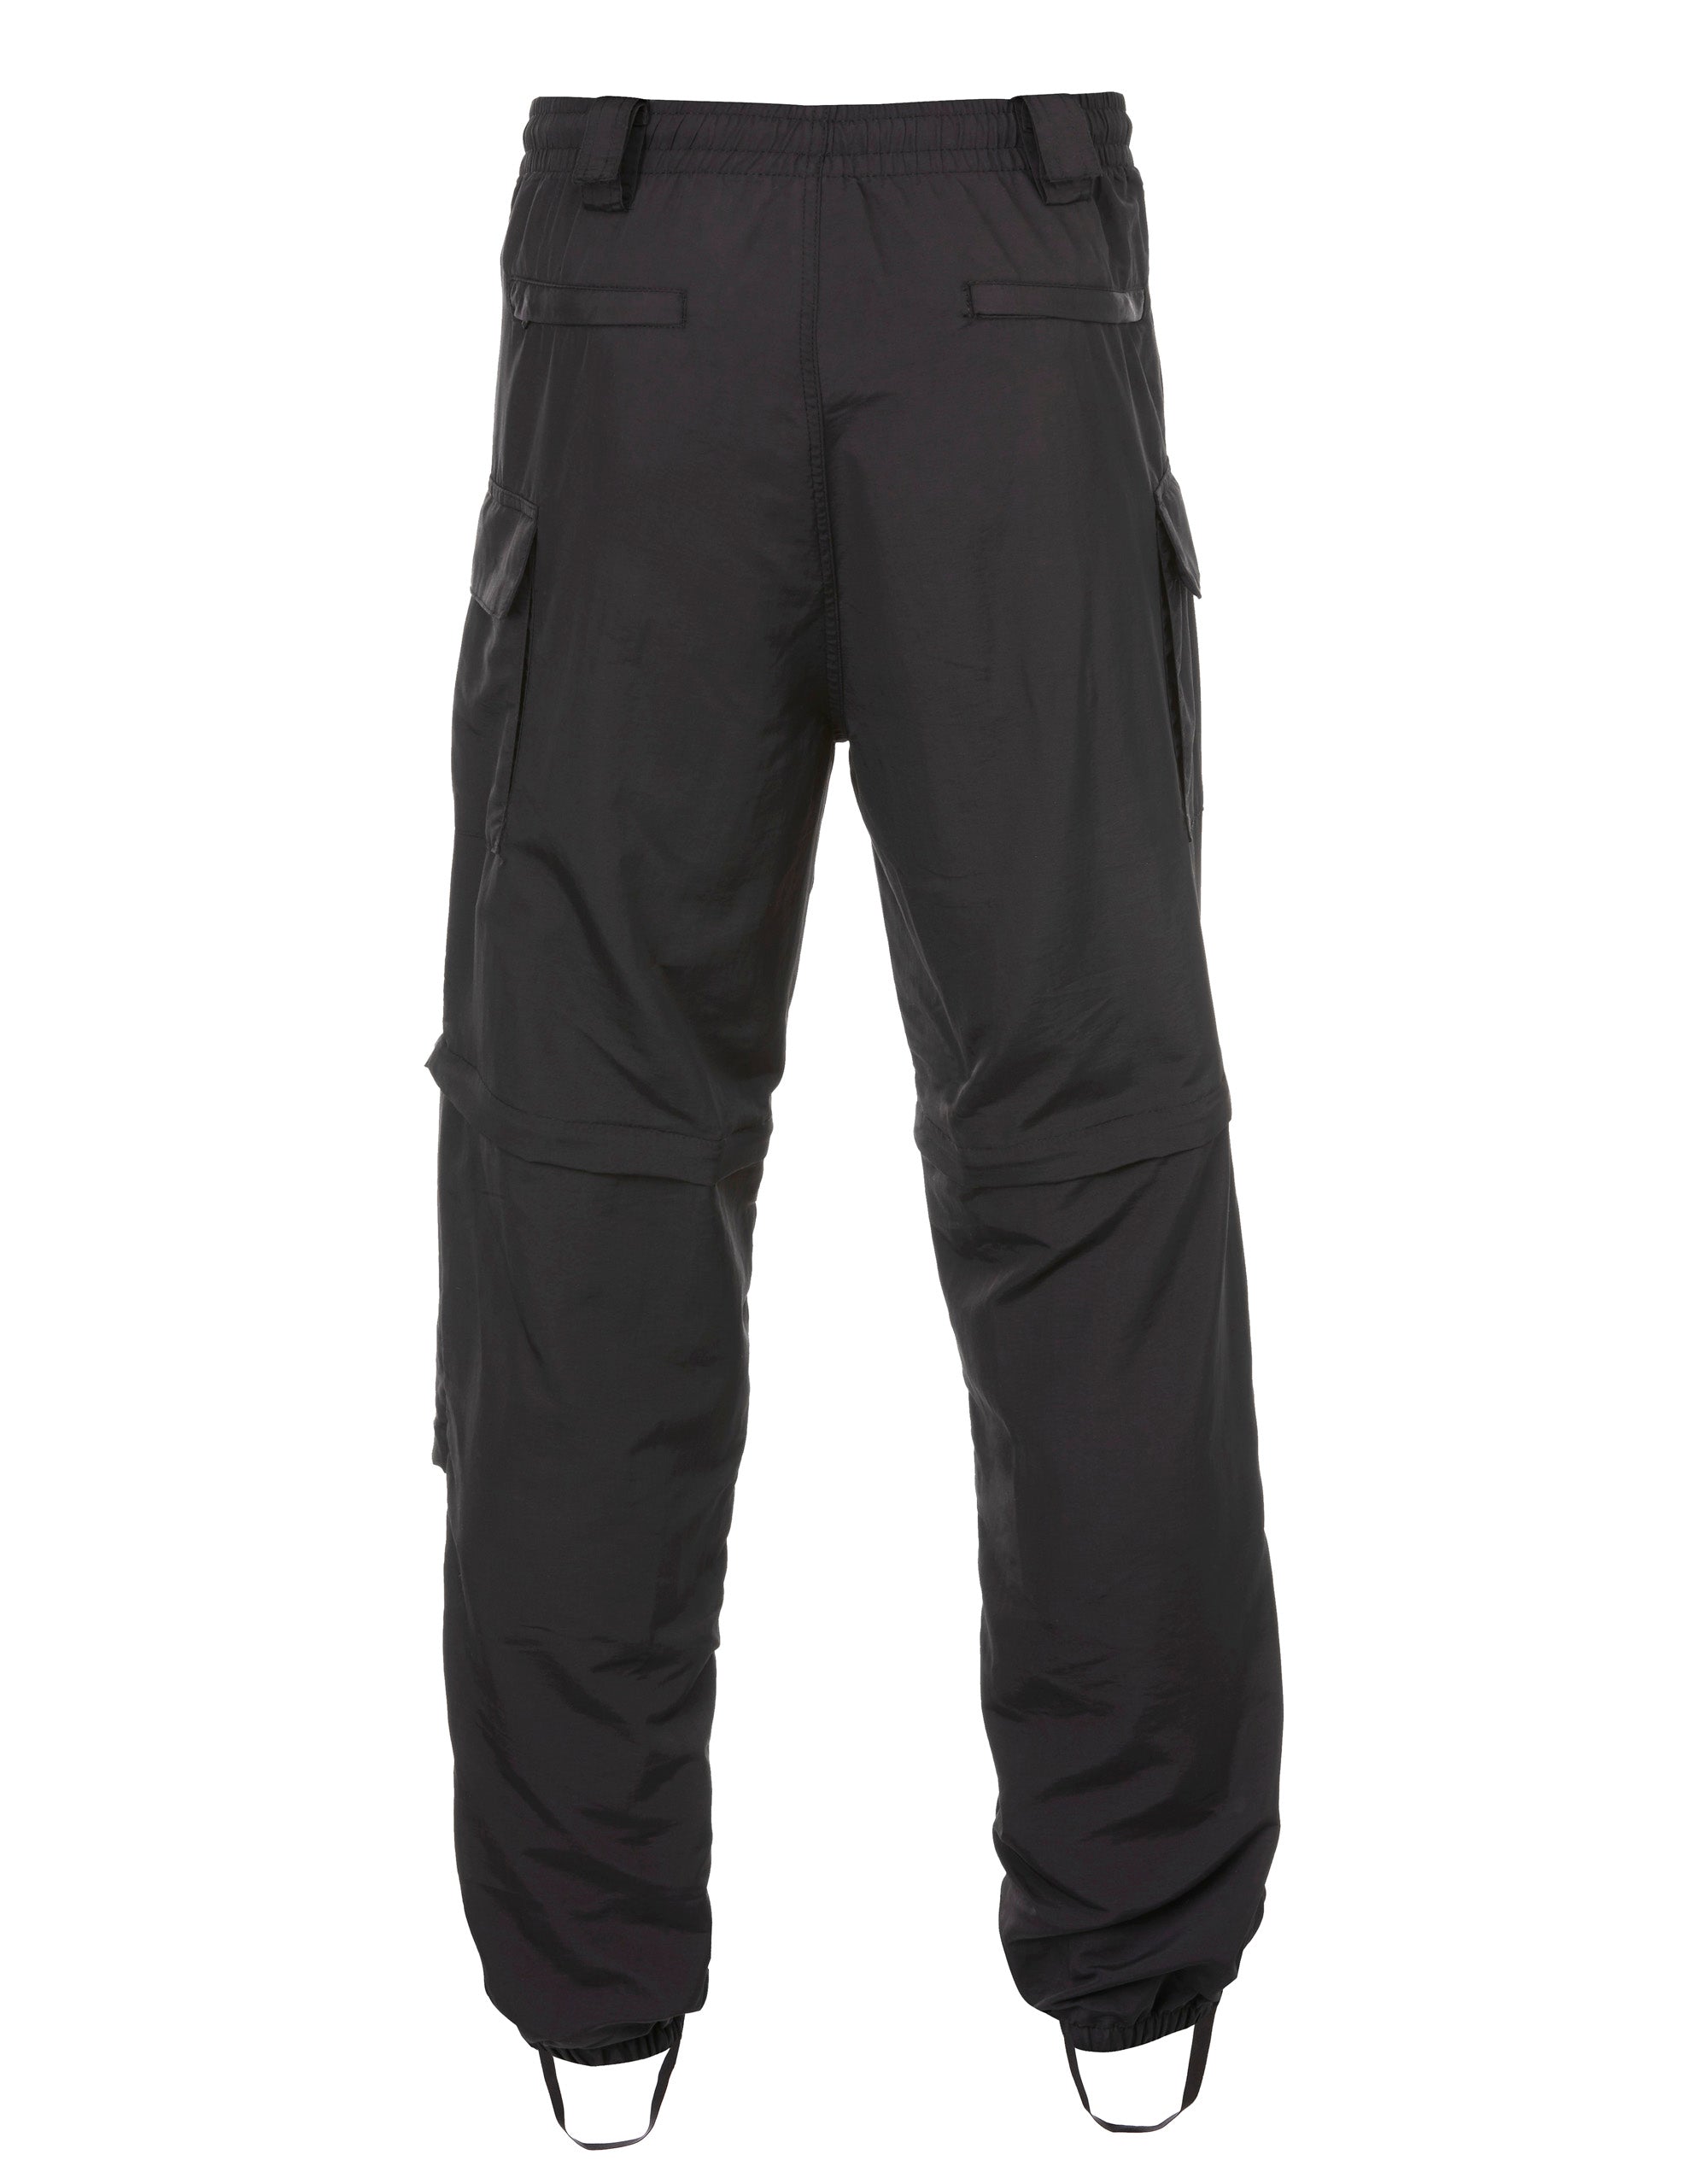 2088Z Zip-Off Pant with Stirrups